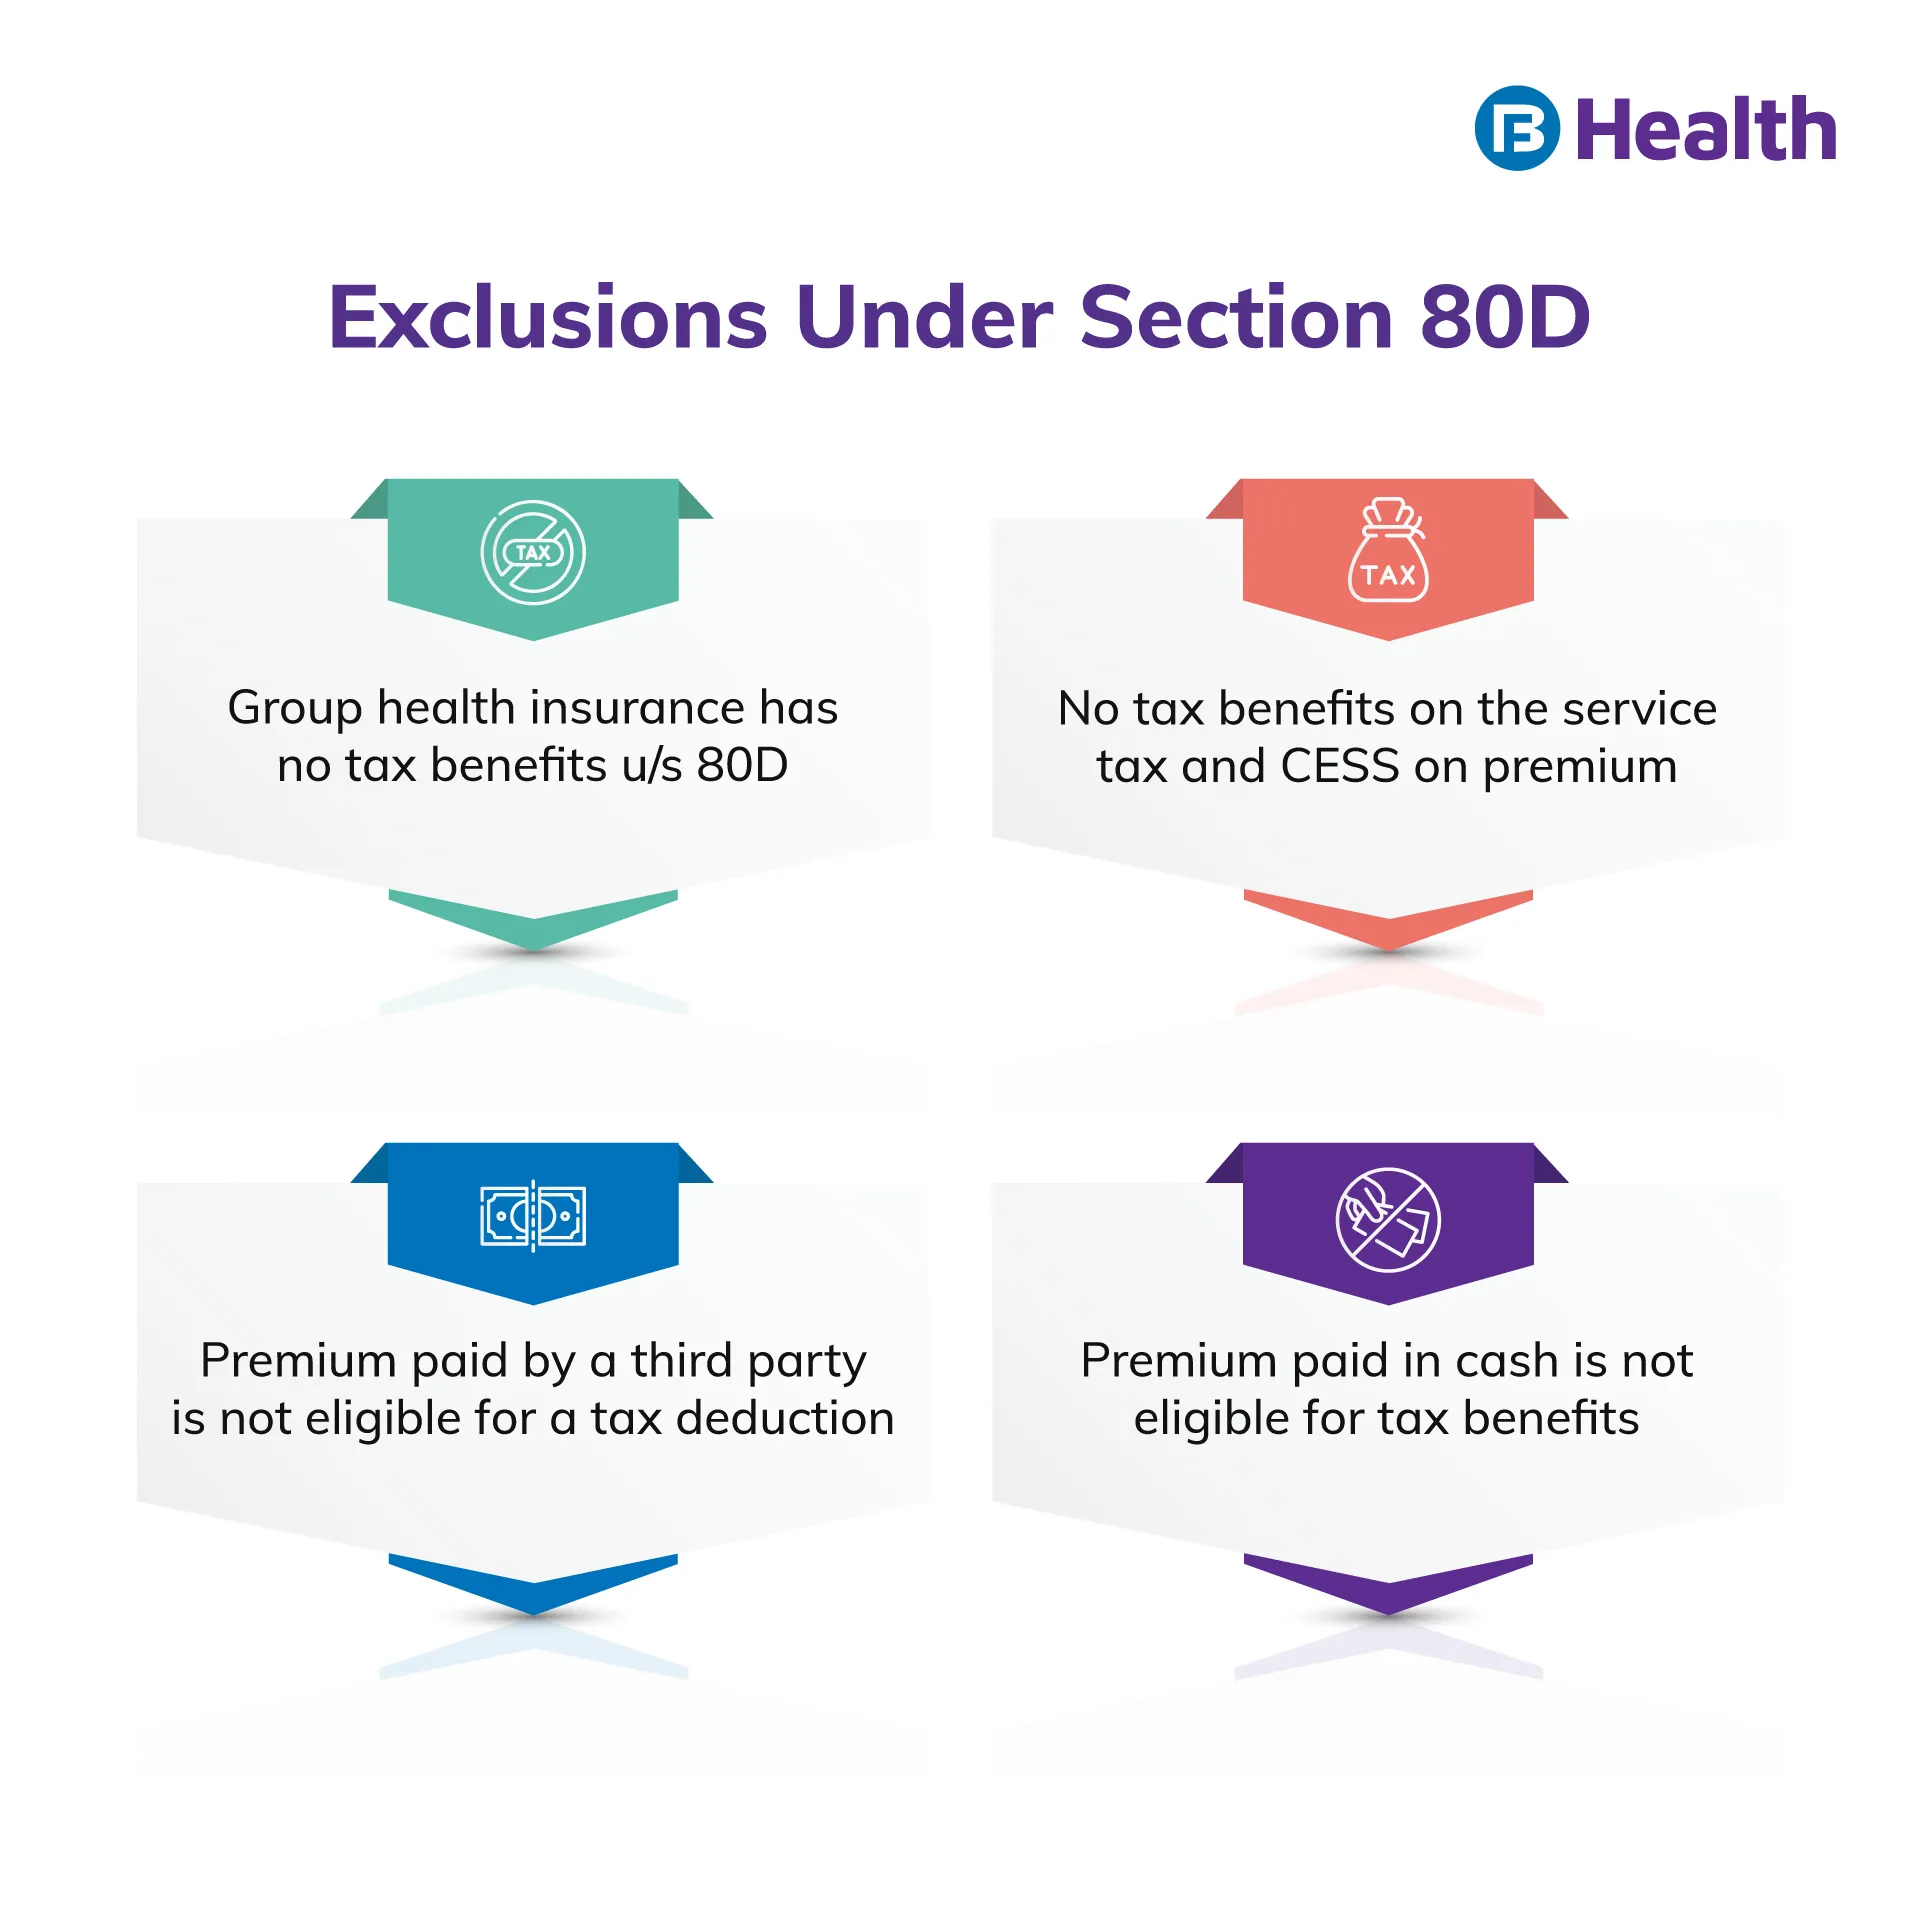 Health Insurance exclusion under Section 80D